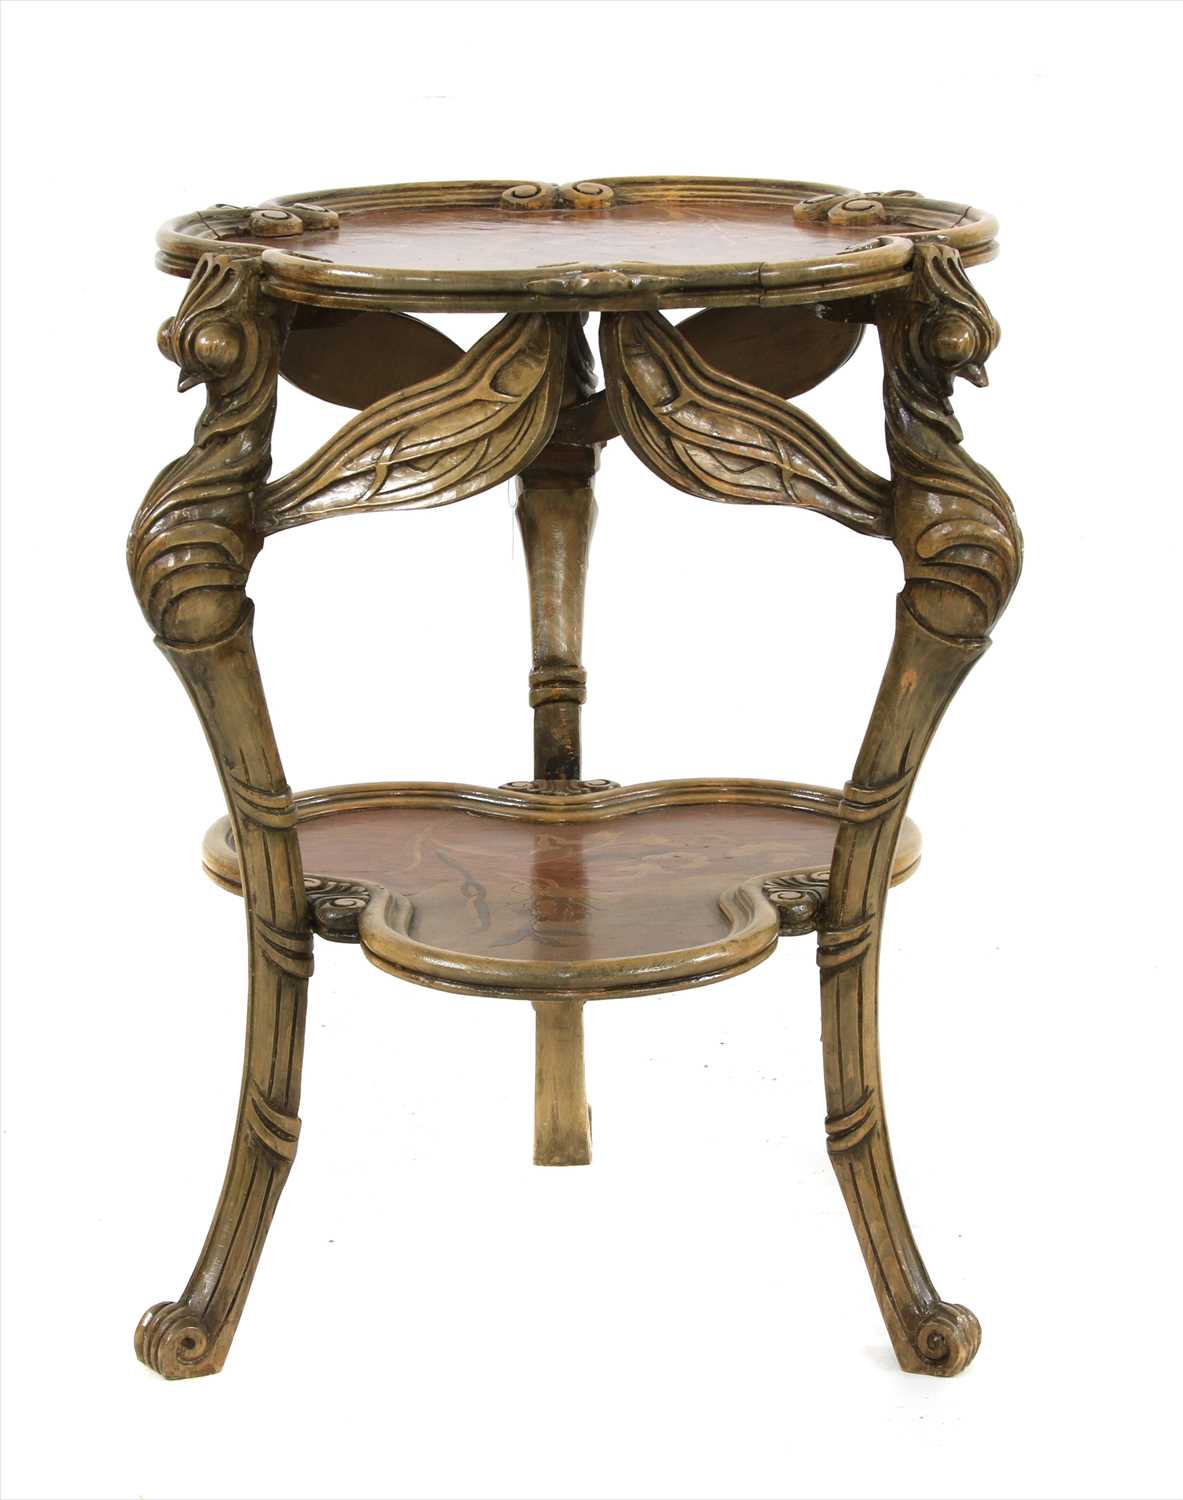 Lot 29 - An Art Nouveau-style inlaid two tier side table